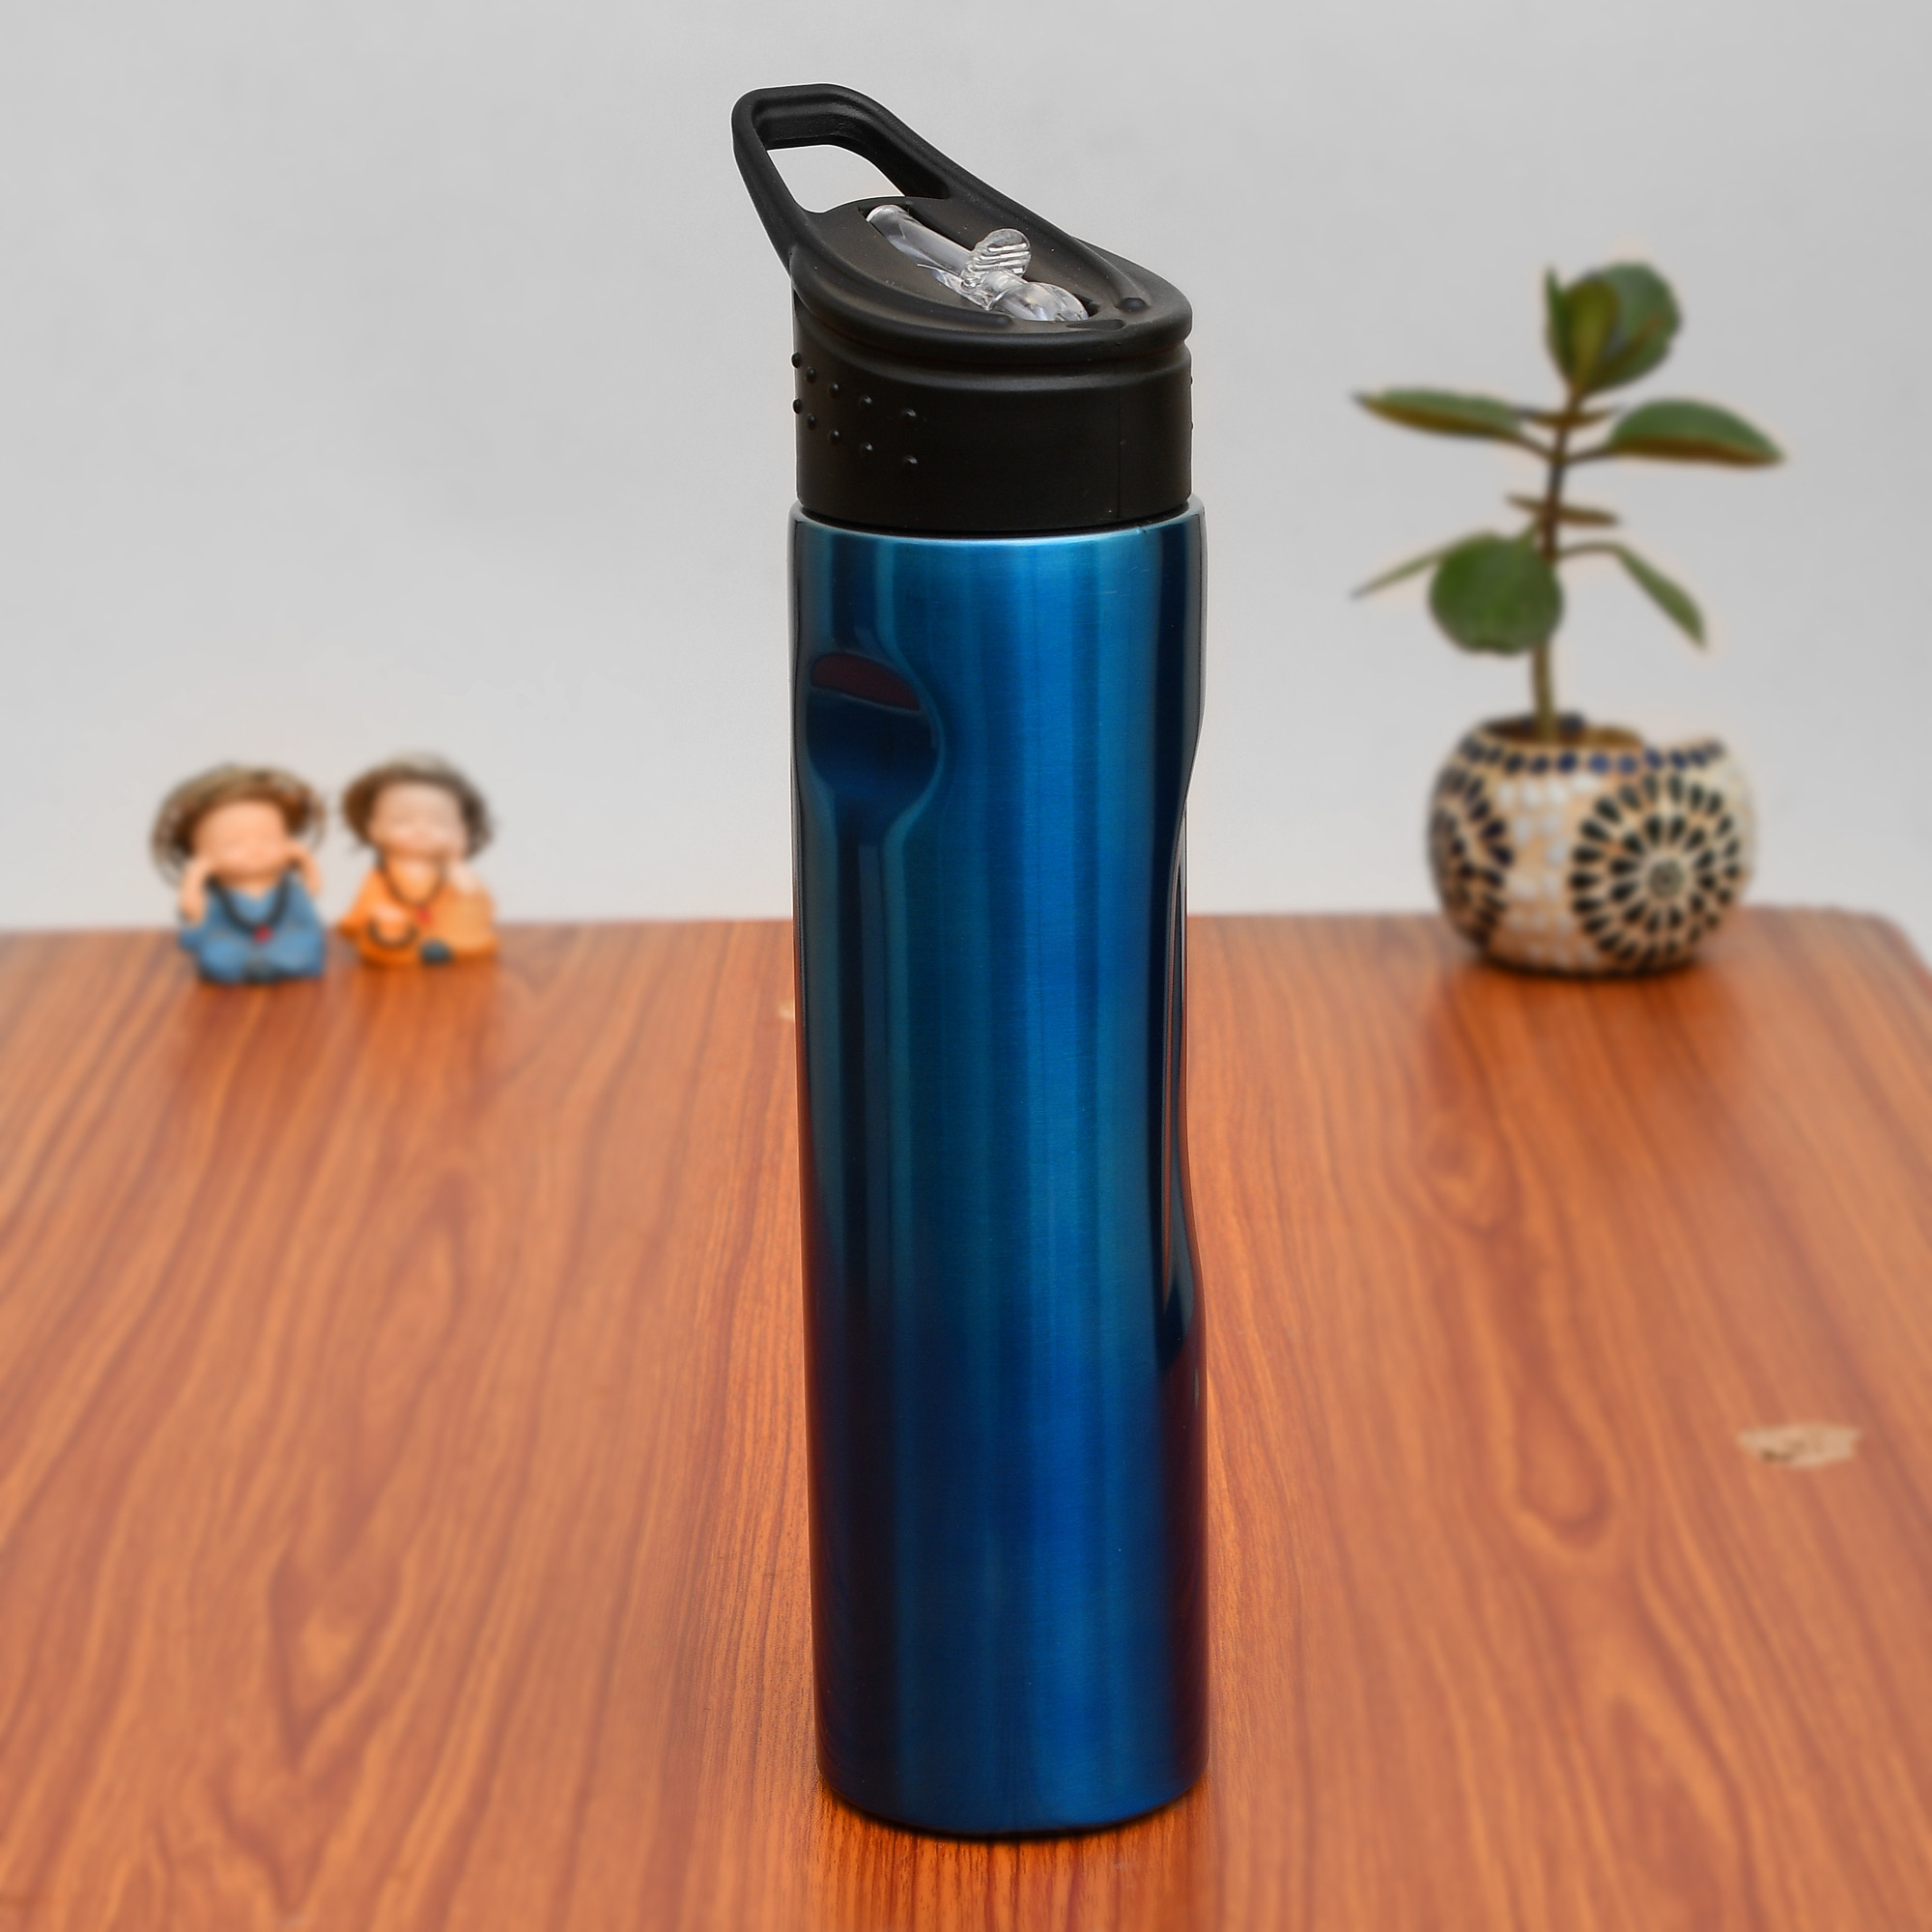 Kuber Industries Stainless Steel BPA Free Drinking Bottle, Leakproof Gym Bottle, Ideal for Sports, Bike, Running, Hiking With Lid Sipper, 700ml (Blue)